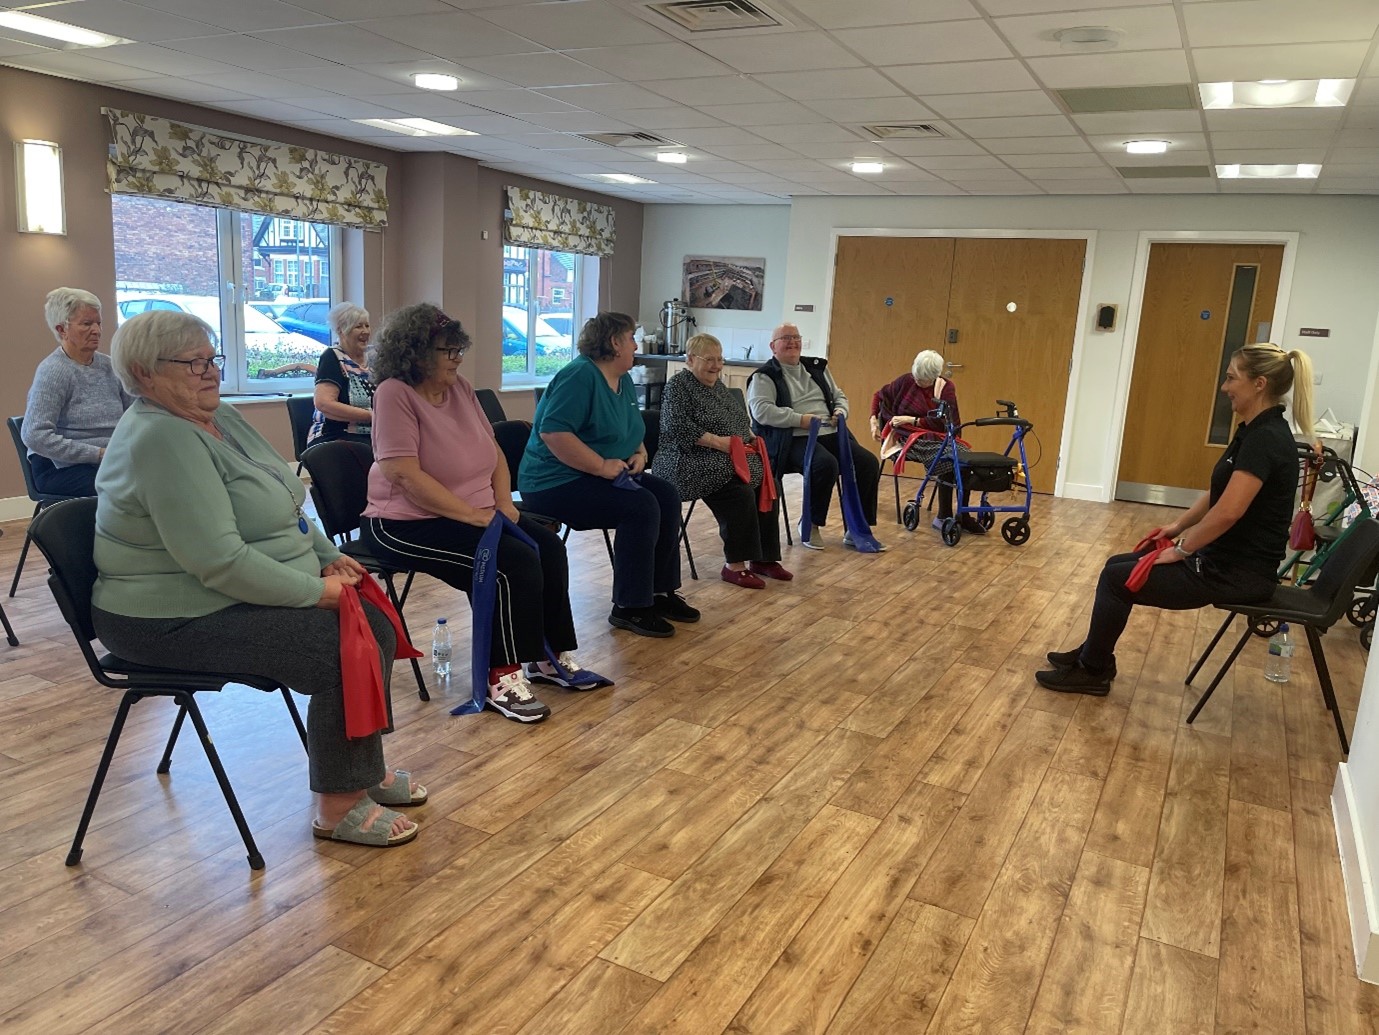 Residents in the community room at West End Village sitting down with resistance bands in their hands laughing and smiling